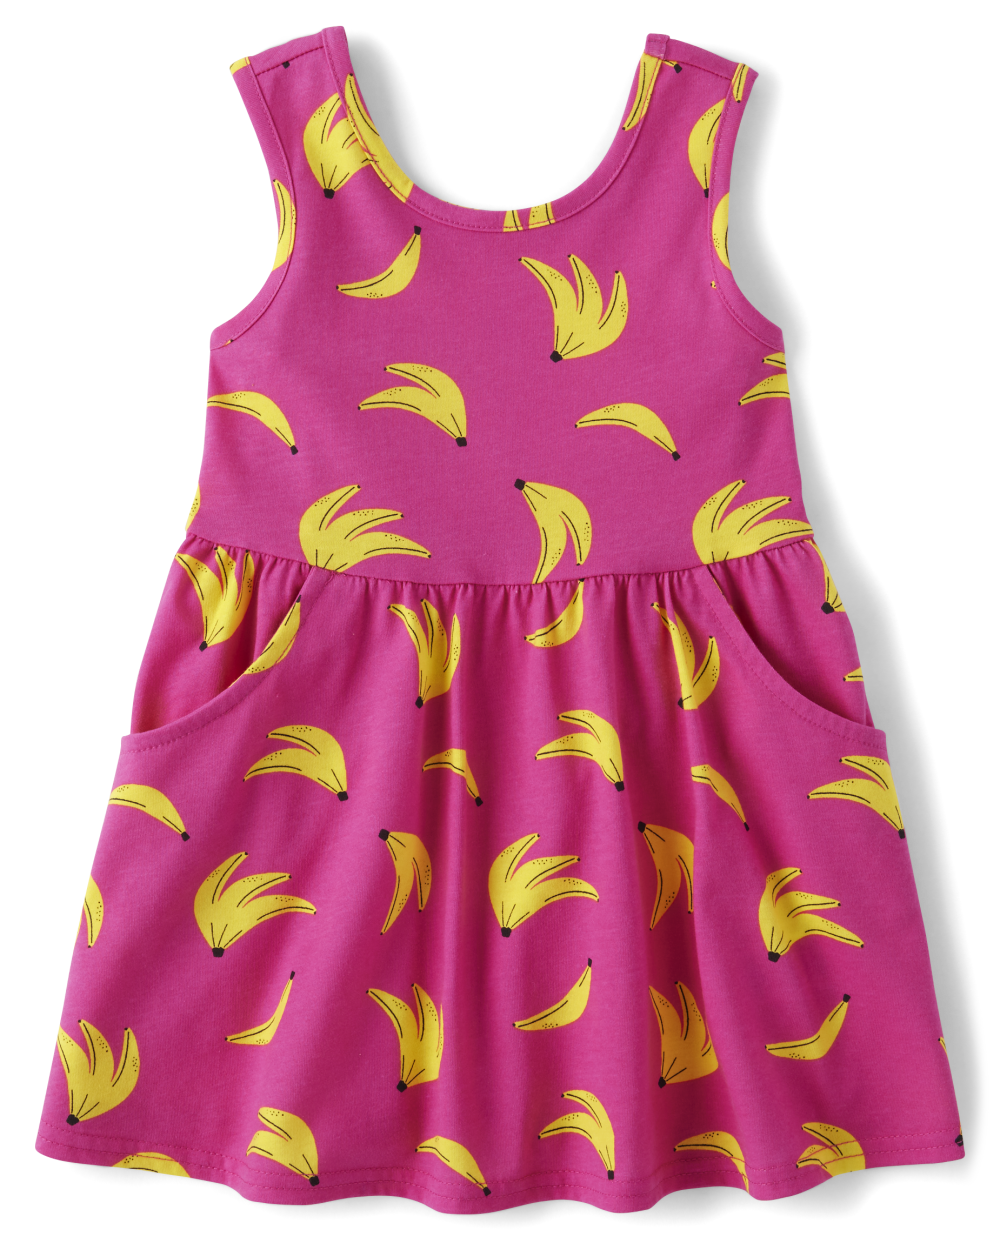 Toddler Baby General Print Scoop Neck Above the Knee Sleeveless Tank Pocketed Dress